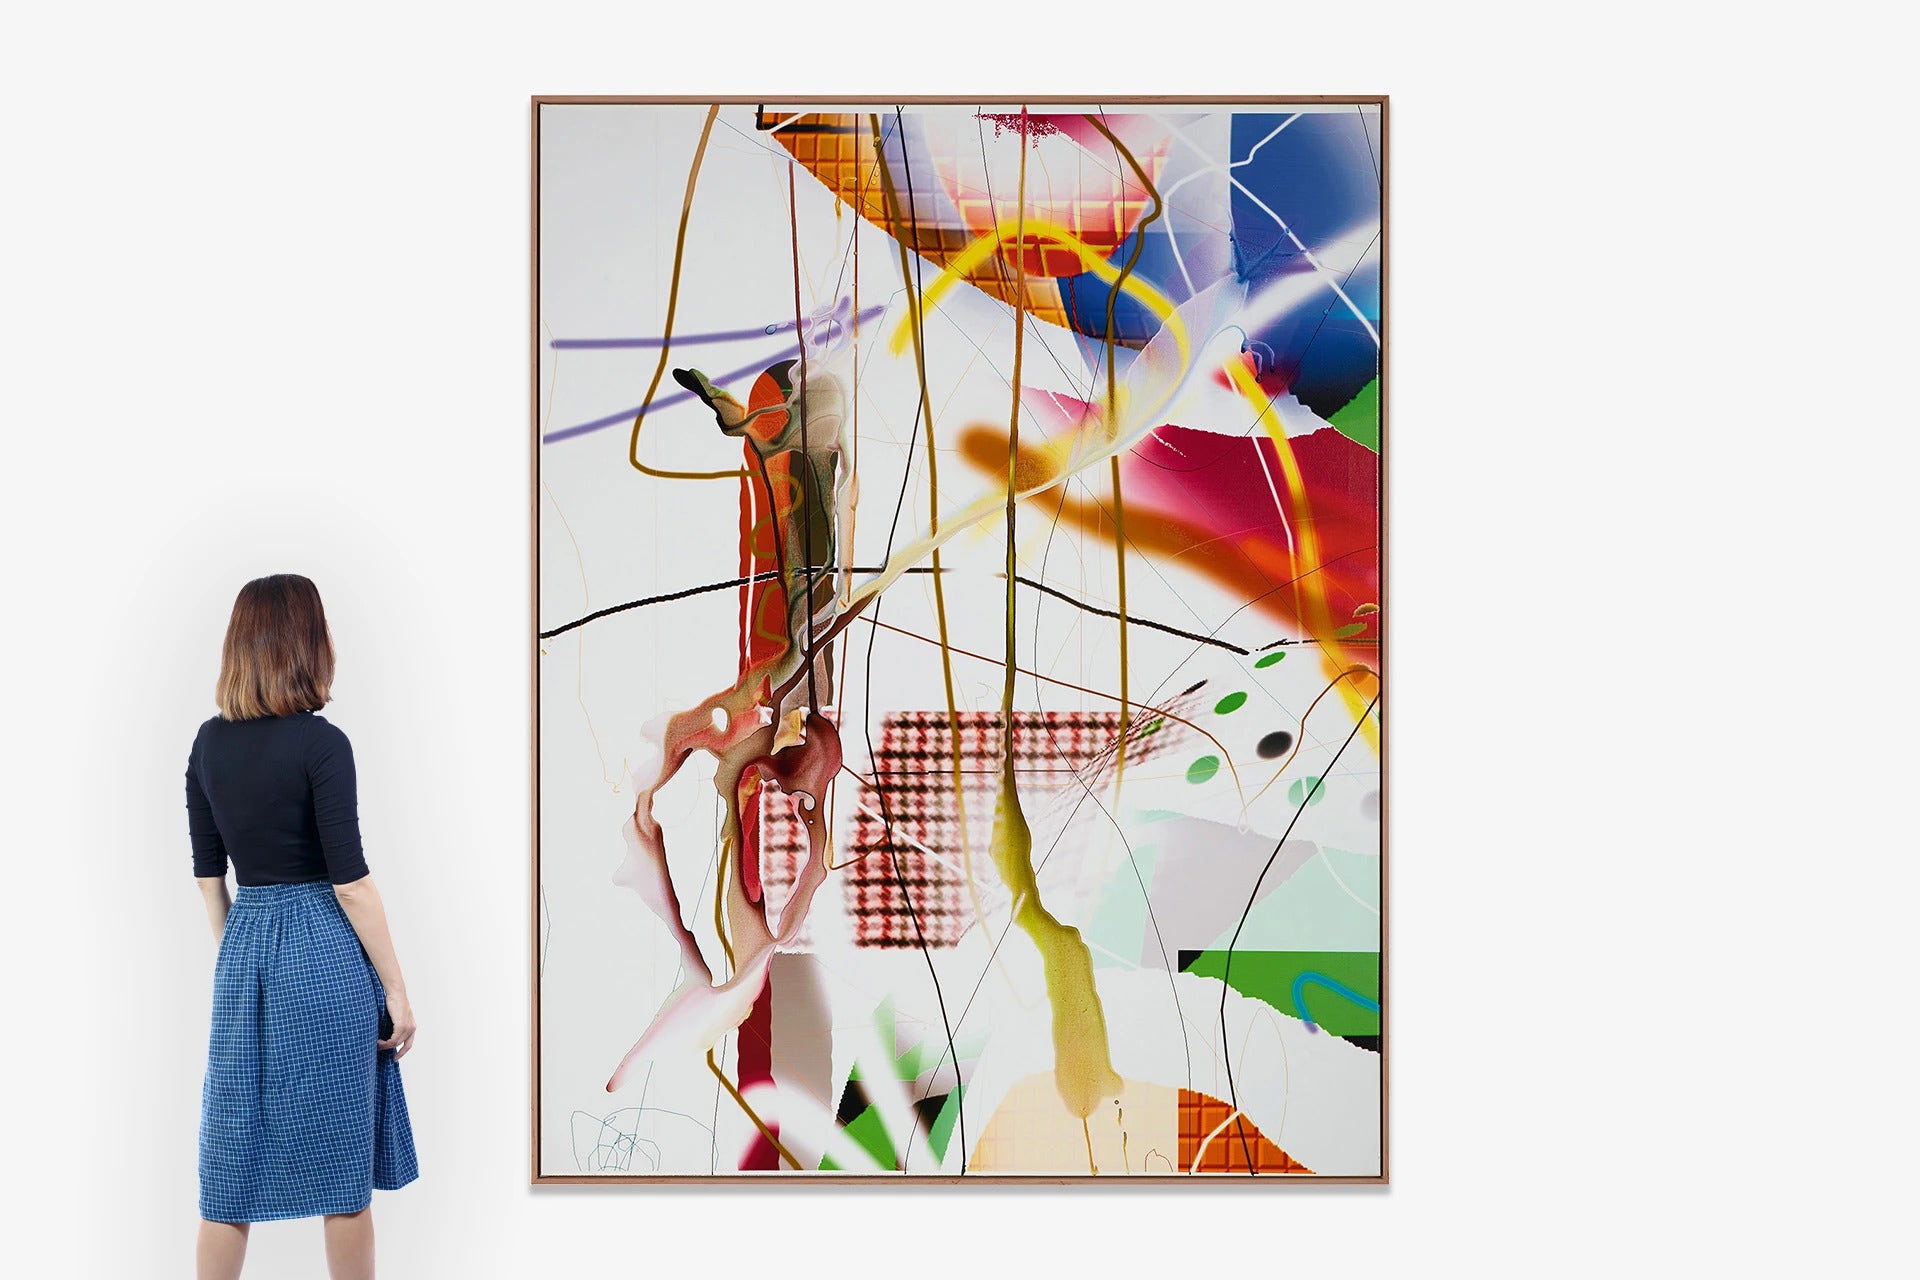 Fractional Investment Offering For $2 Million Albert Oehlen Painting Now Live